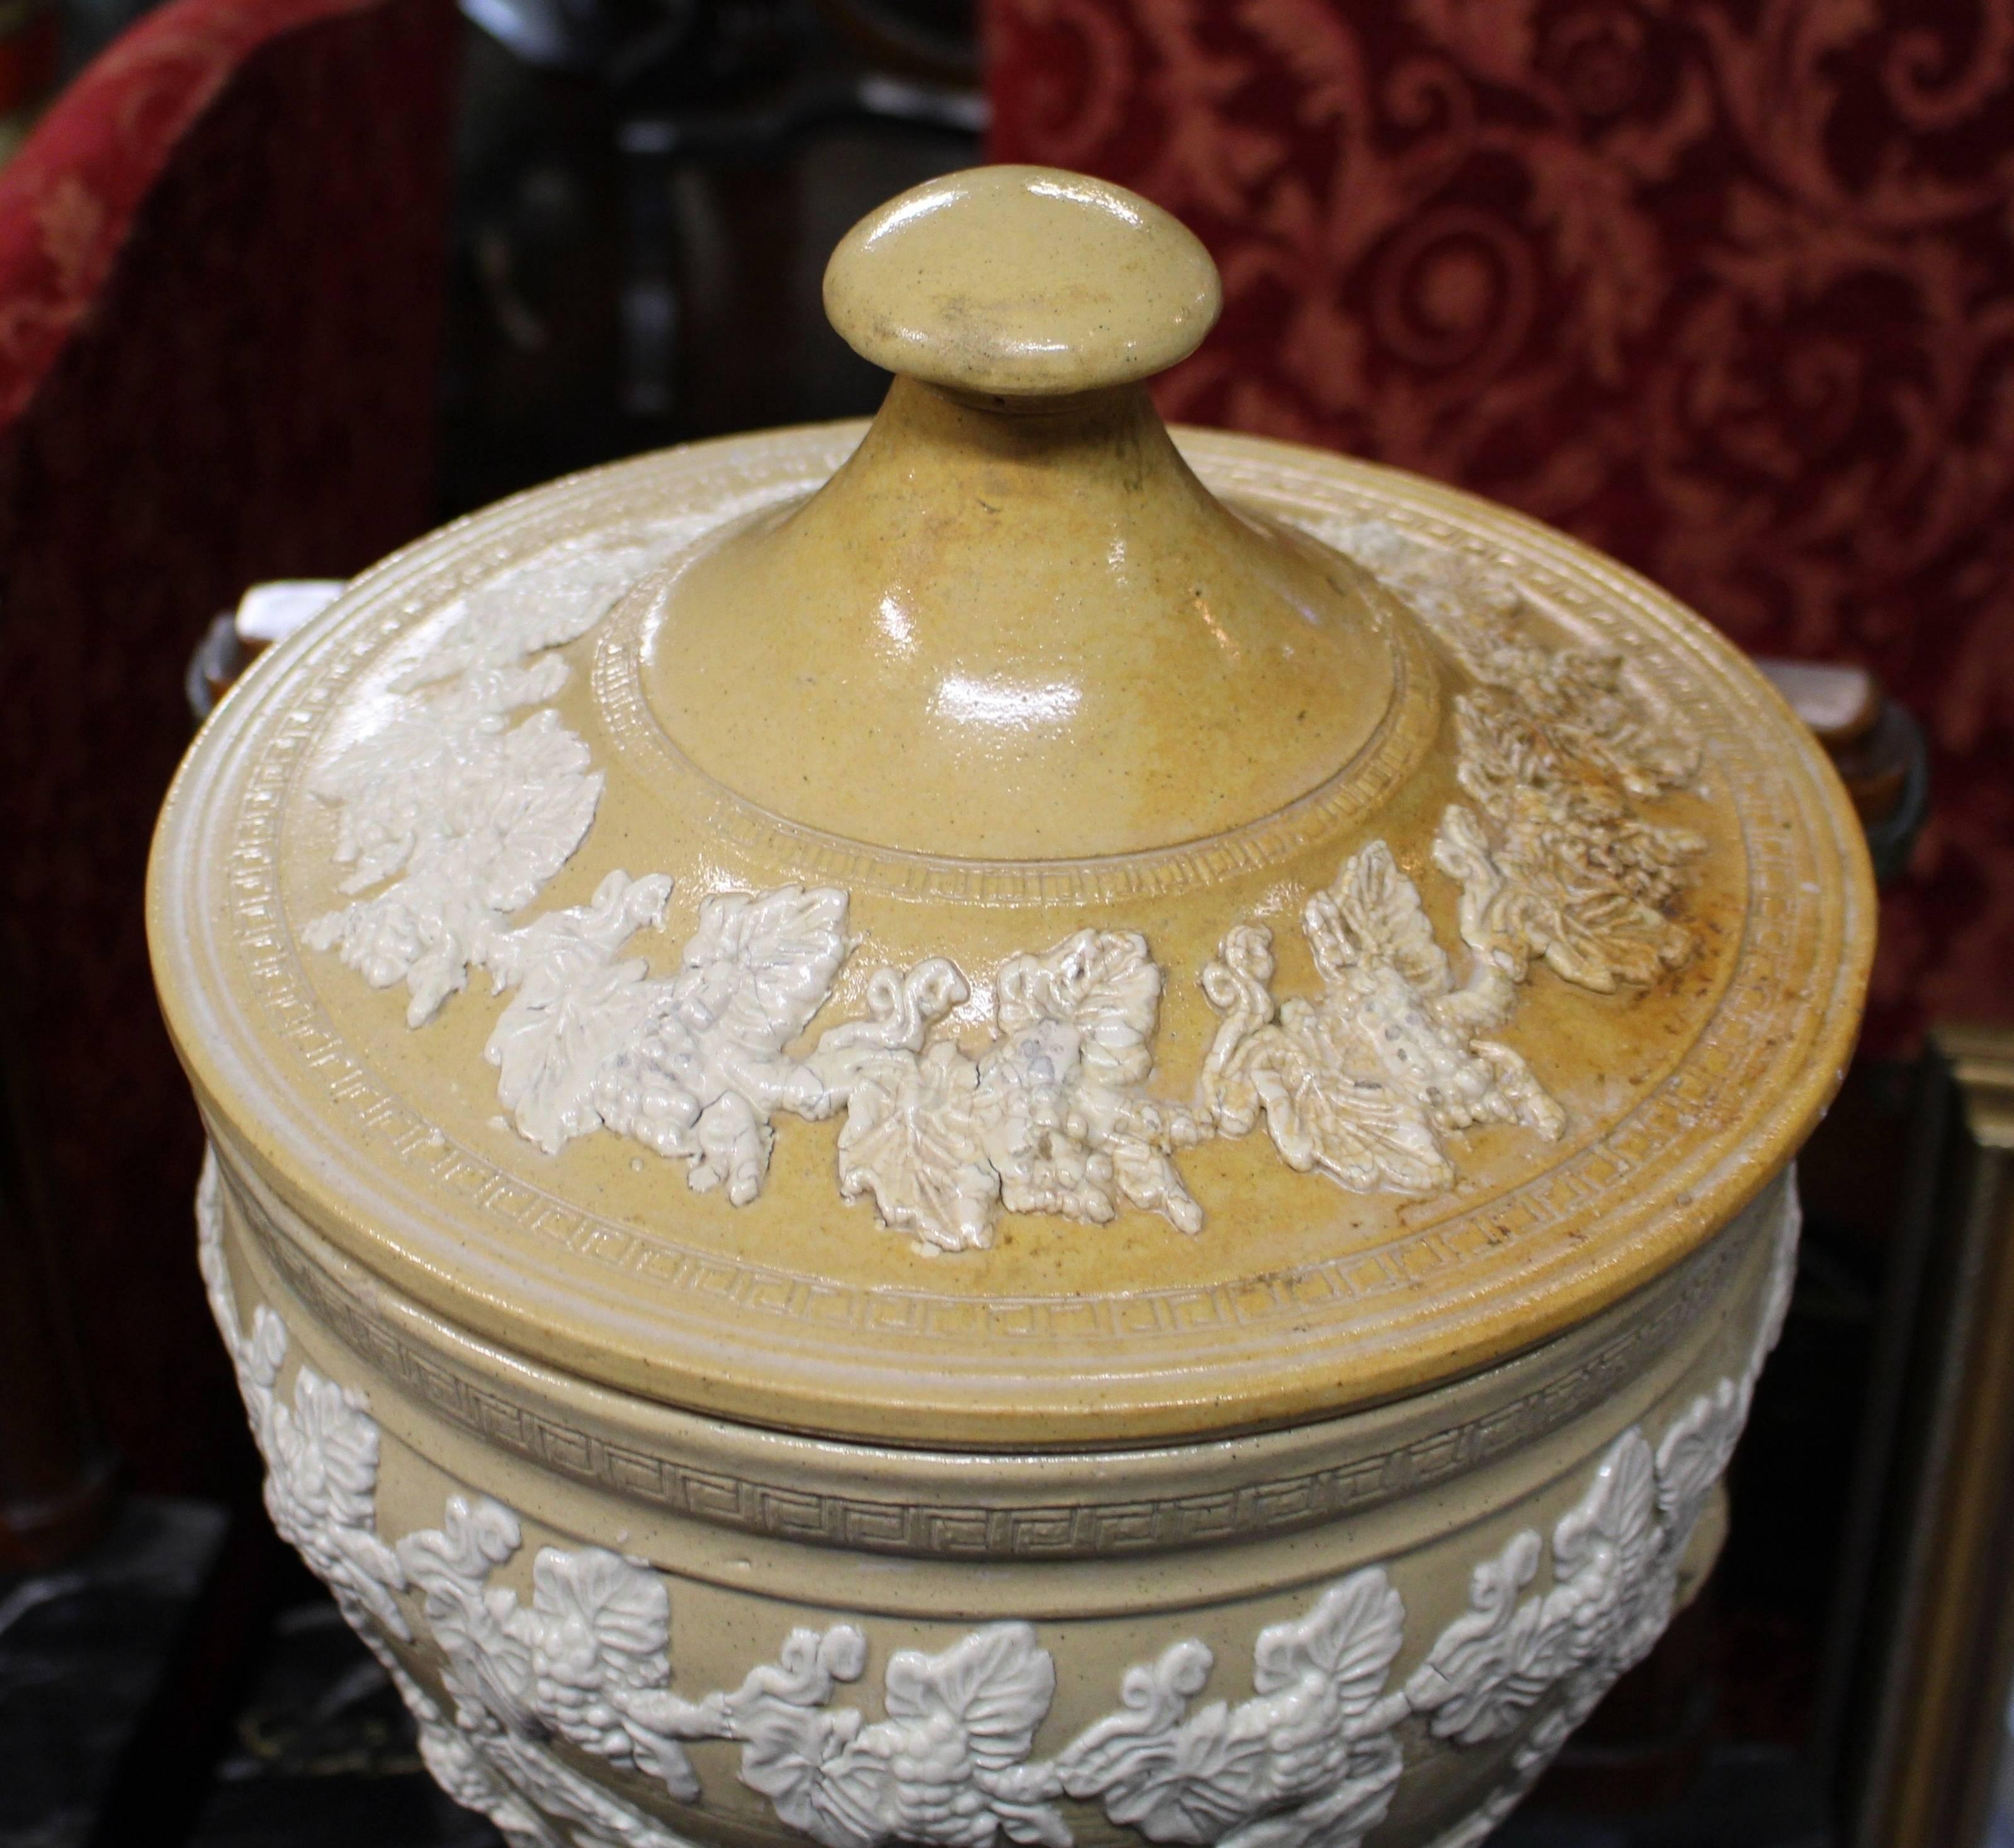 

Period Victorian,
Manufacturer Lipscombe & Co.
Composition Stoneware,
Height 51 cm / 20 in,
Condition Very good condition. Minor nicks commensurate with age. Complete with tap.

19th century stoneware Lipscombe & Co water filter

Of